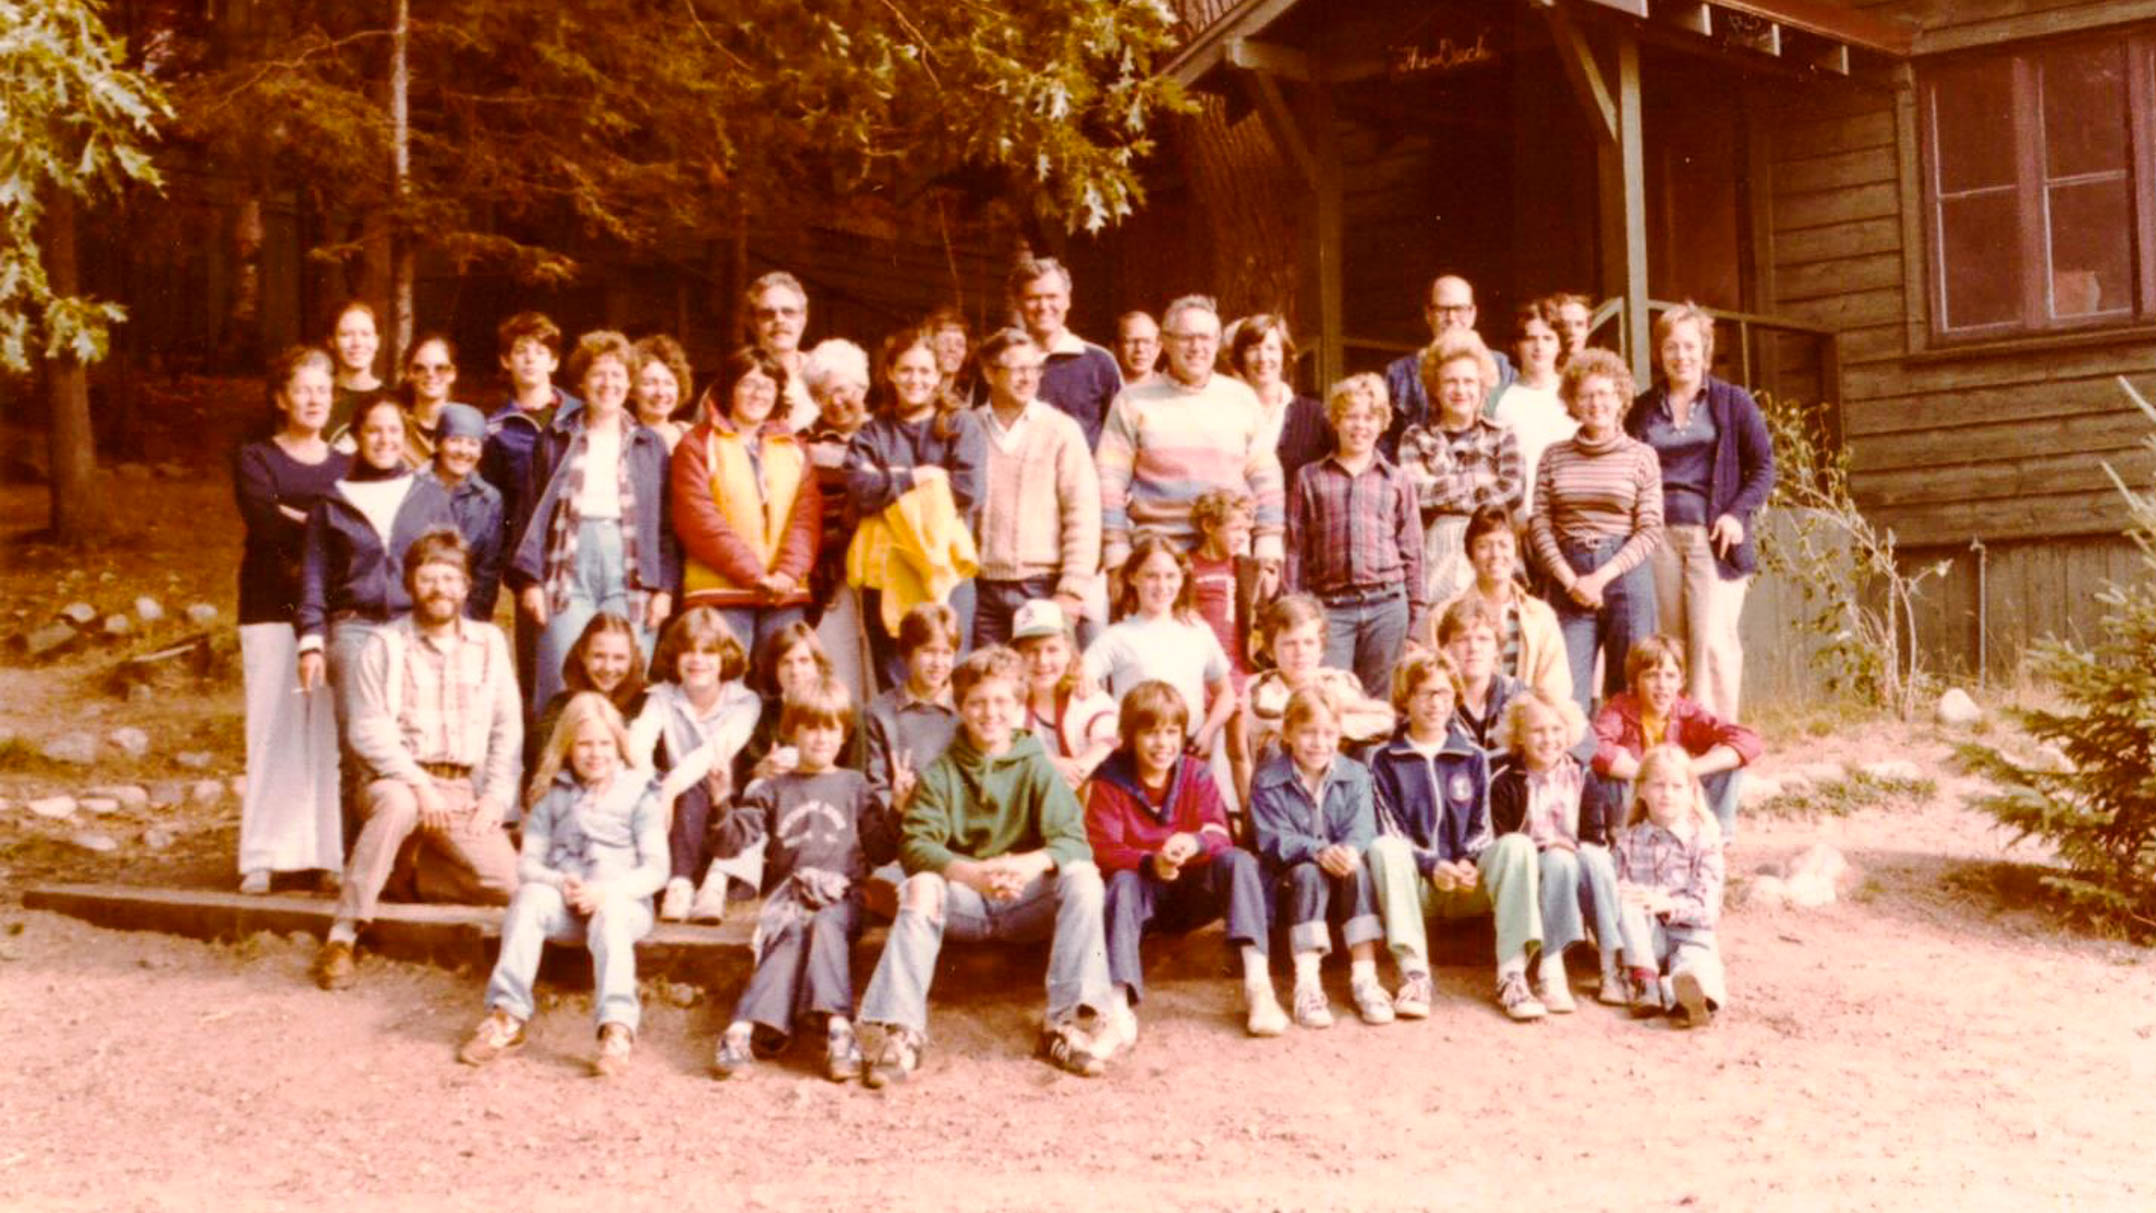 Group photo of 1977 family camp participants